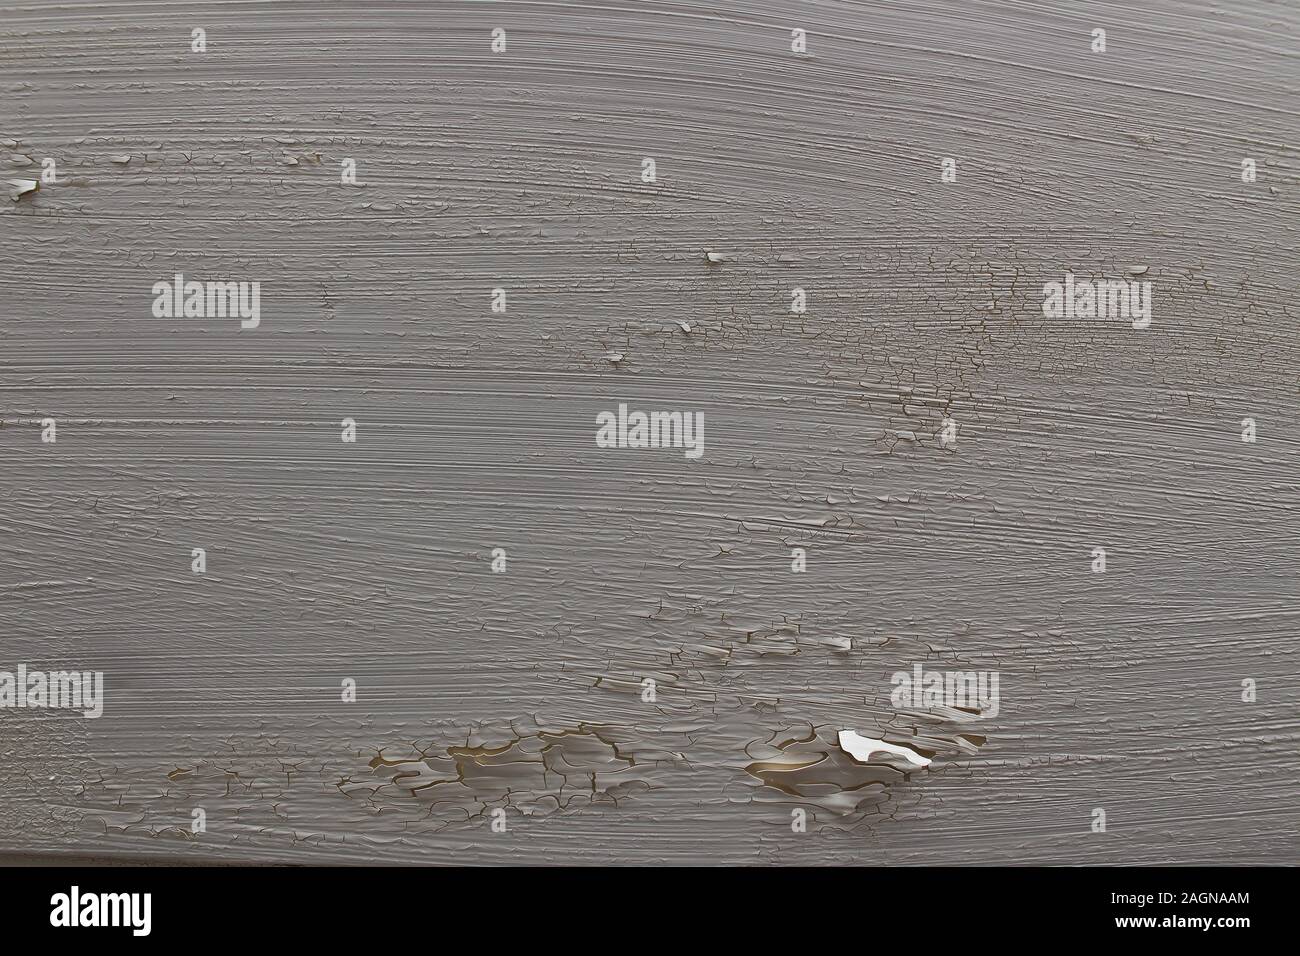 Wall with cracked white paint peeling off Stock Photo